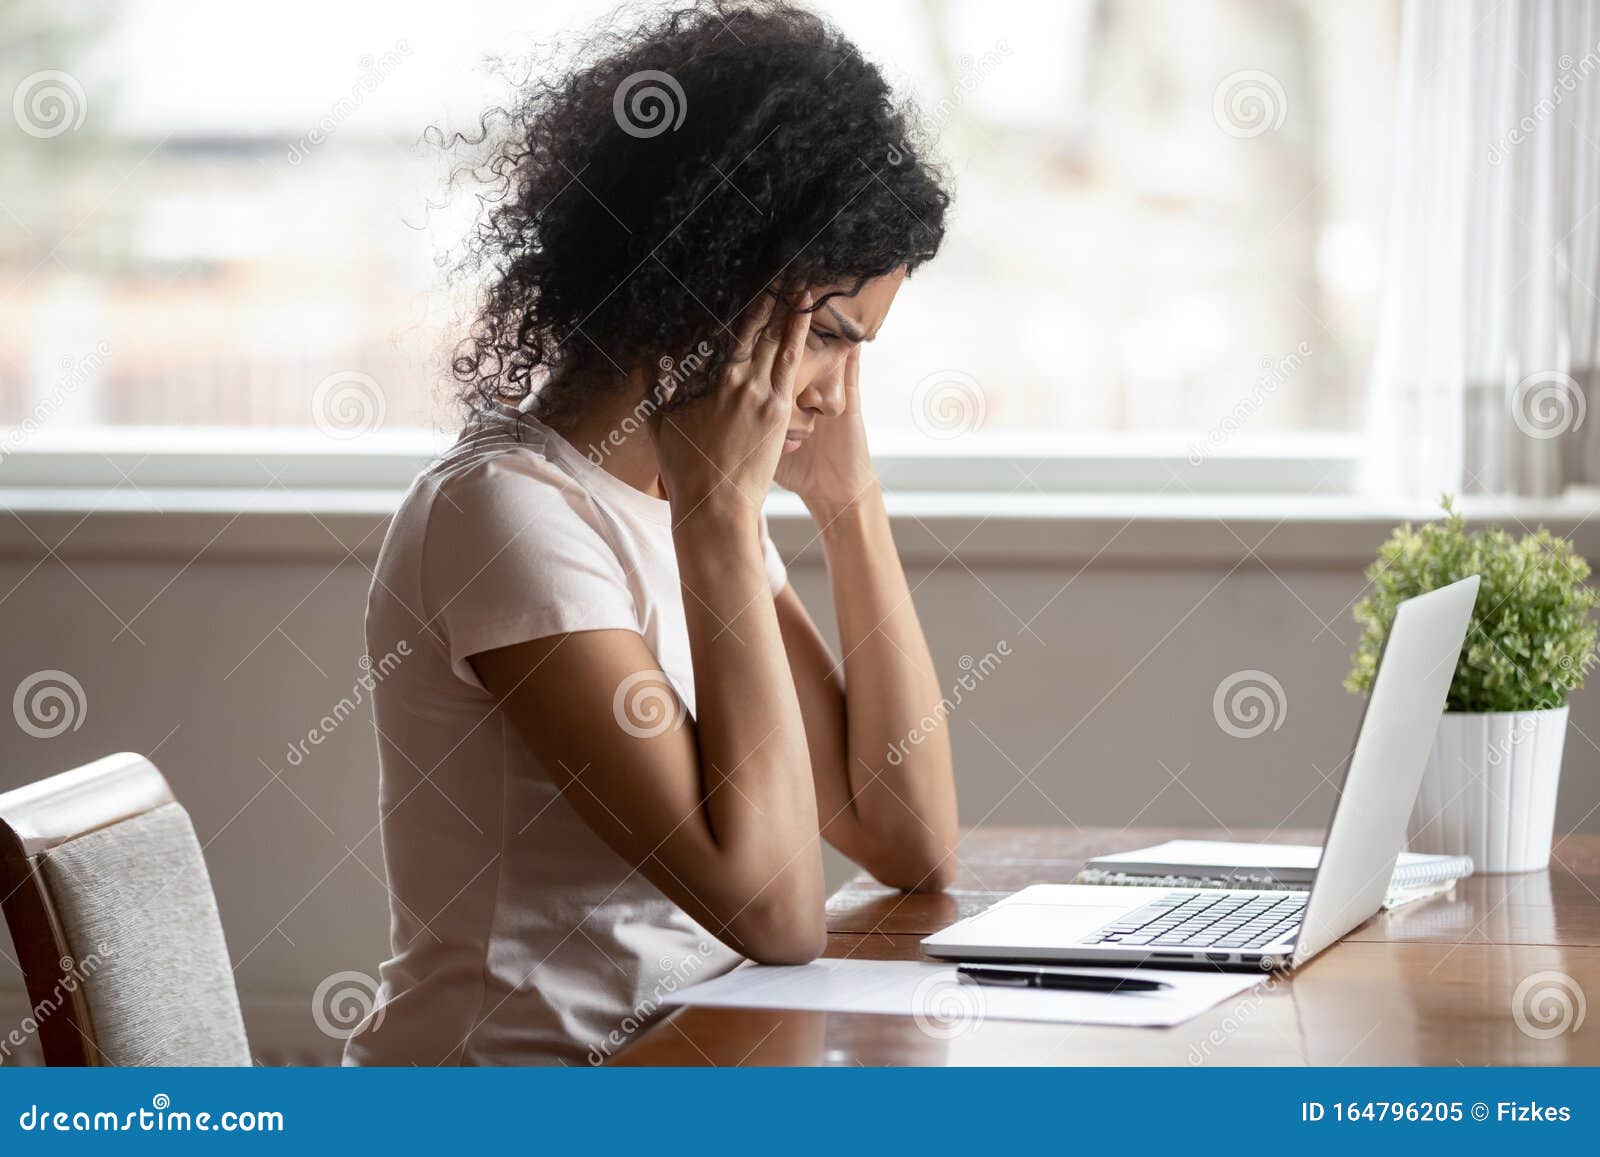 unwell biracial woman suffer from headache working at laptop